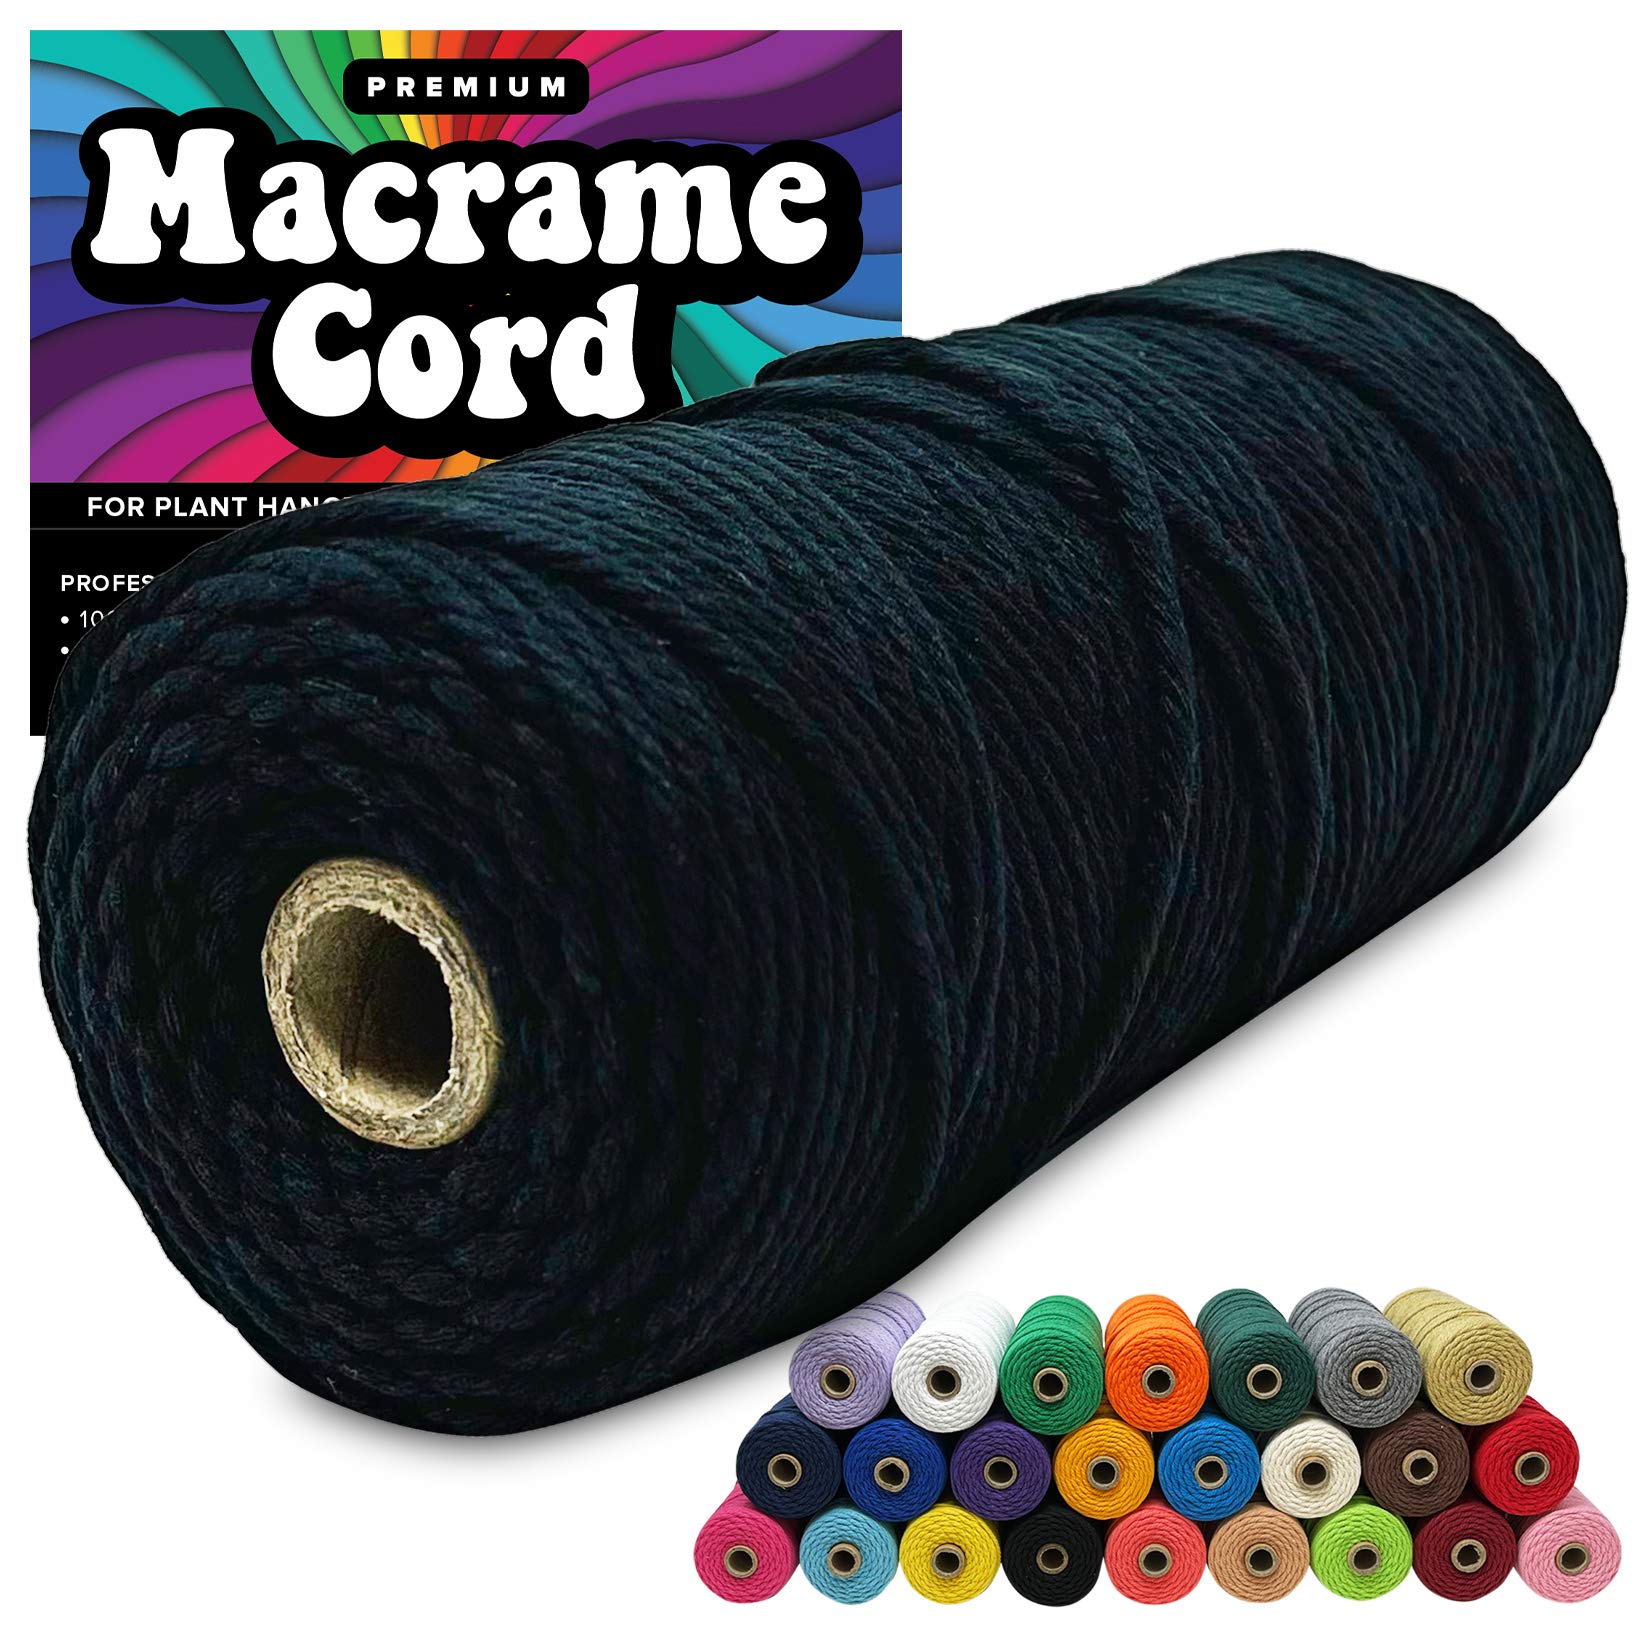 3mm Macrame Cord Cords for Macrame 100% Cotton Macrame Cord Rope for Macrame Natural in Colors and Colored Craft String Yarn Supplies and Materials 325 Feet Cotton Rope  - Like New